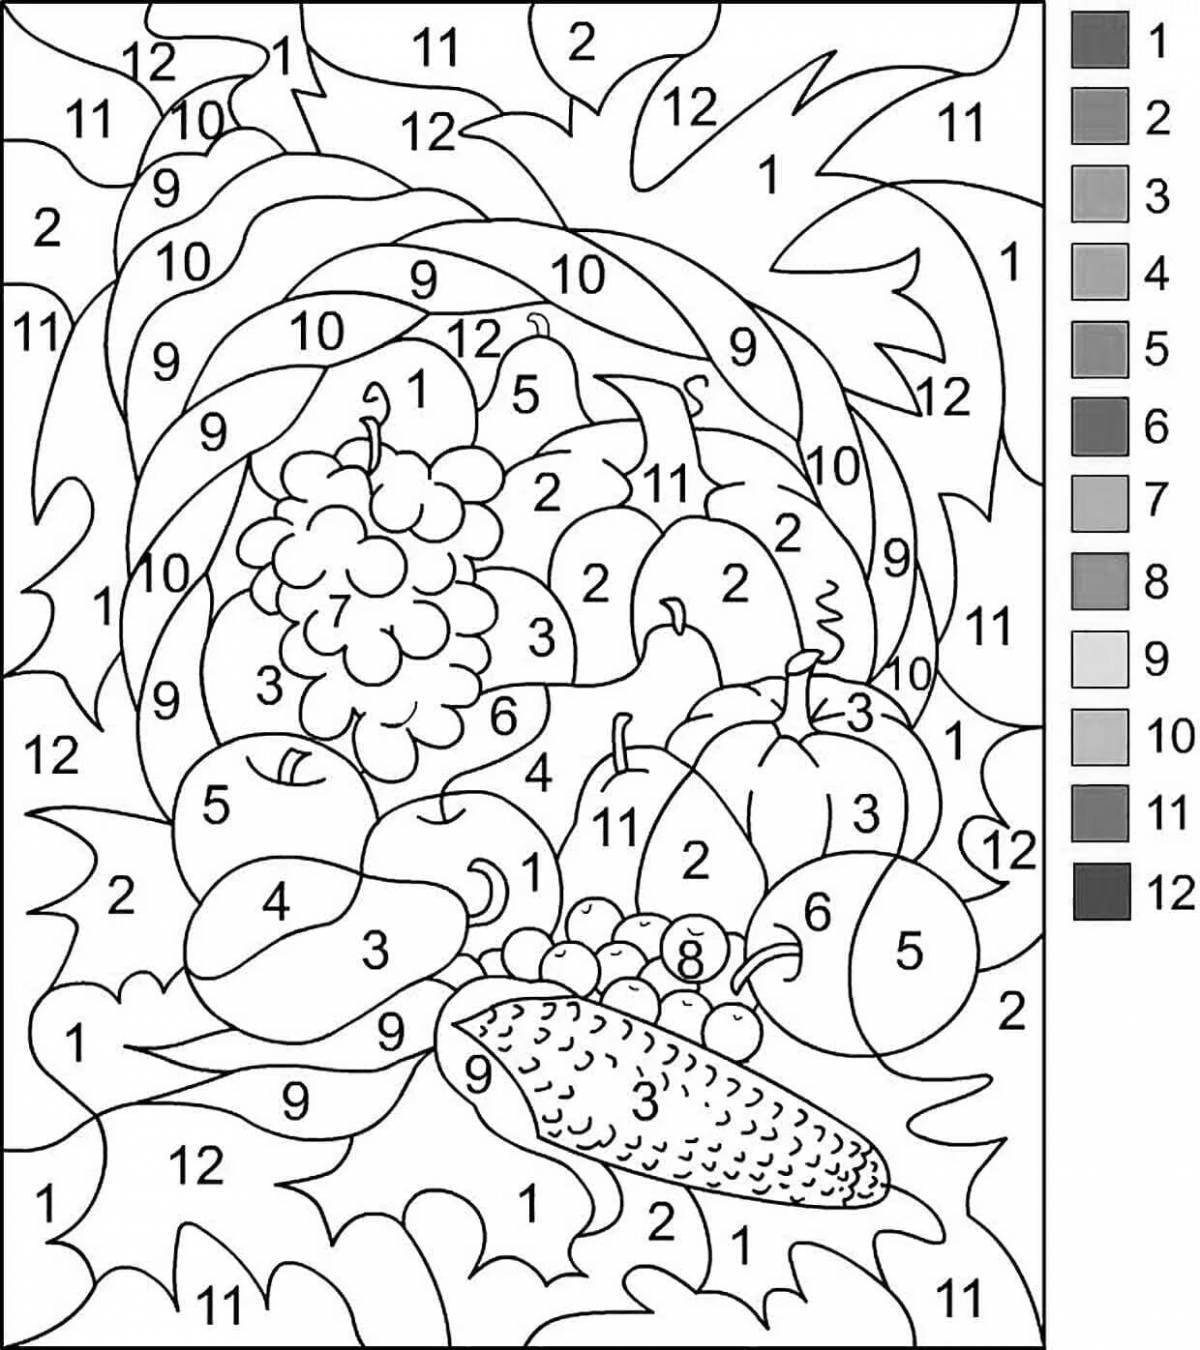 Relaxing coloring by numbers for kids 5-7 years old